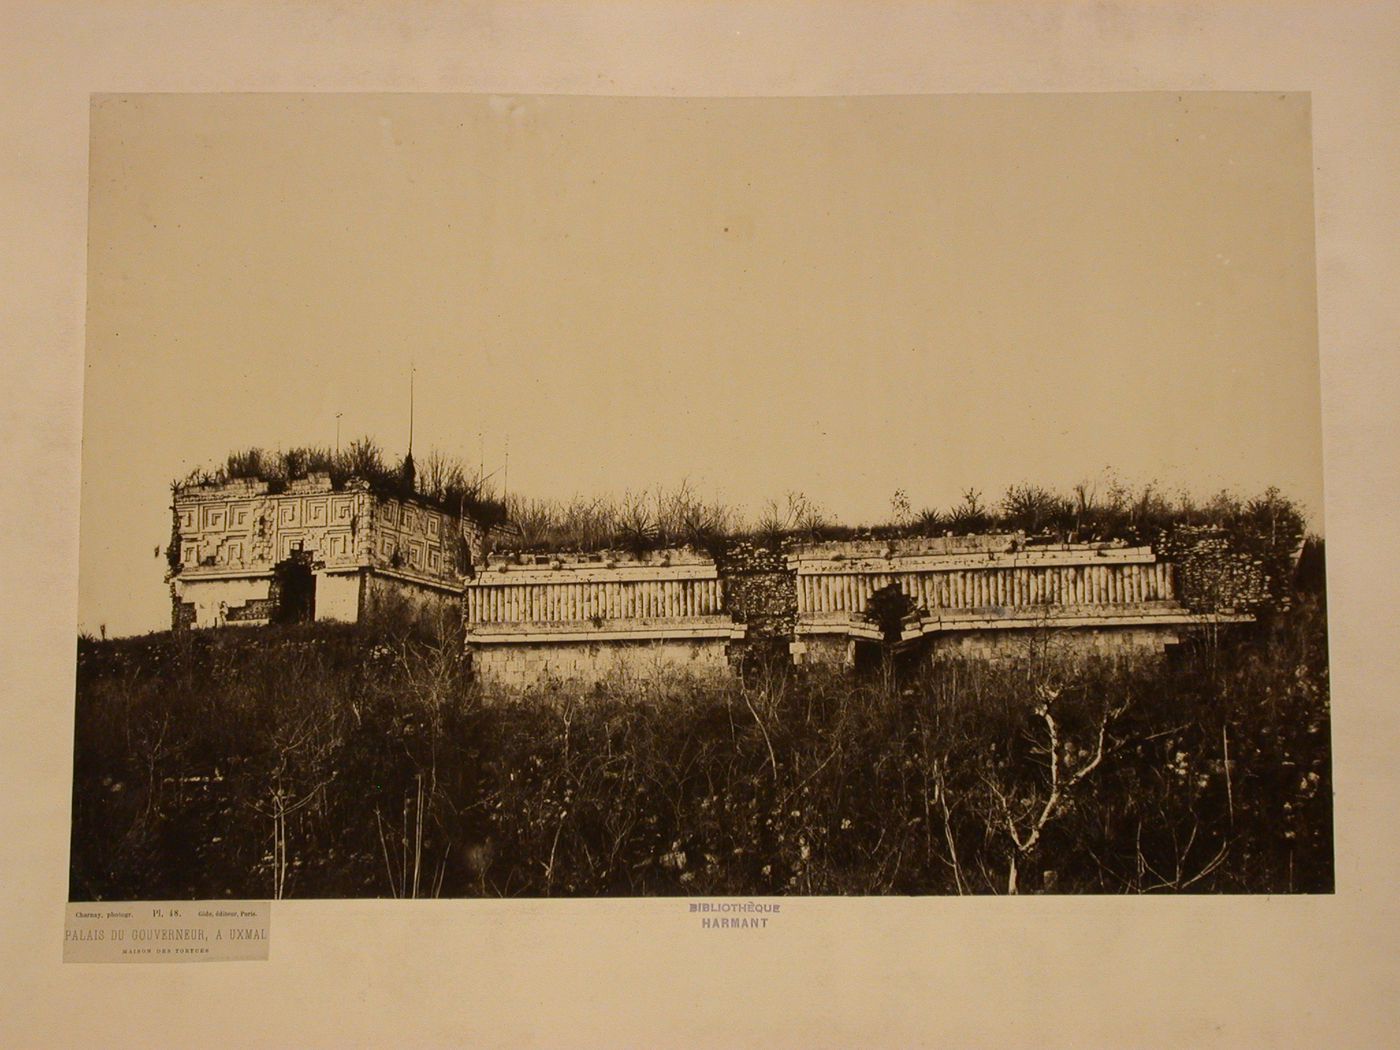 View of the House of the Turtles with the Palace of the Governor on the left, Uxmal Site, Mexico